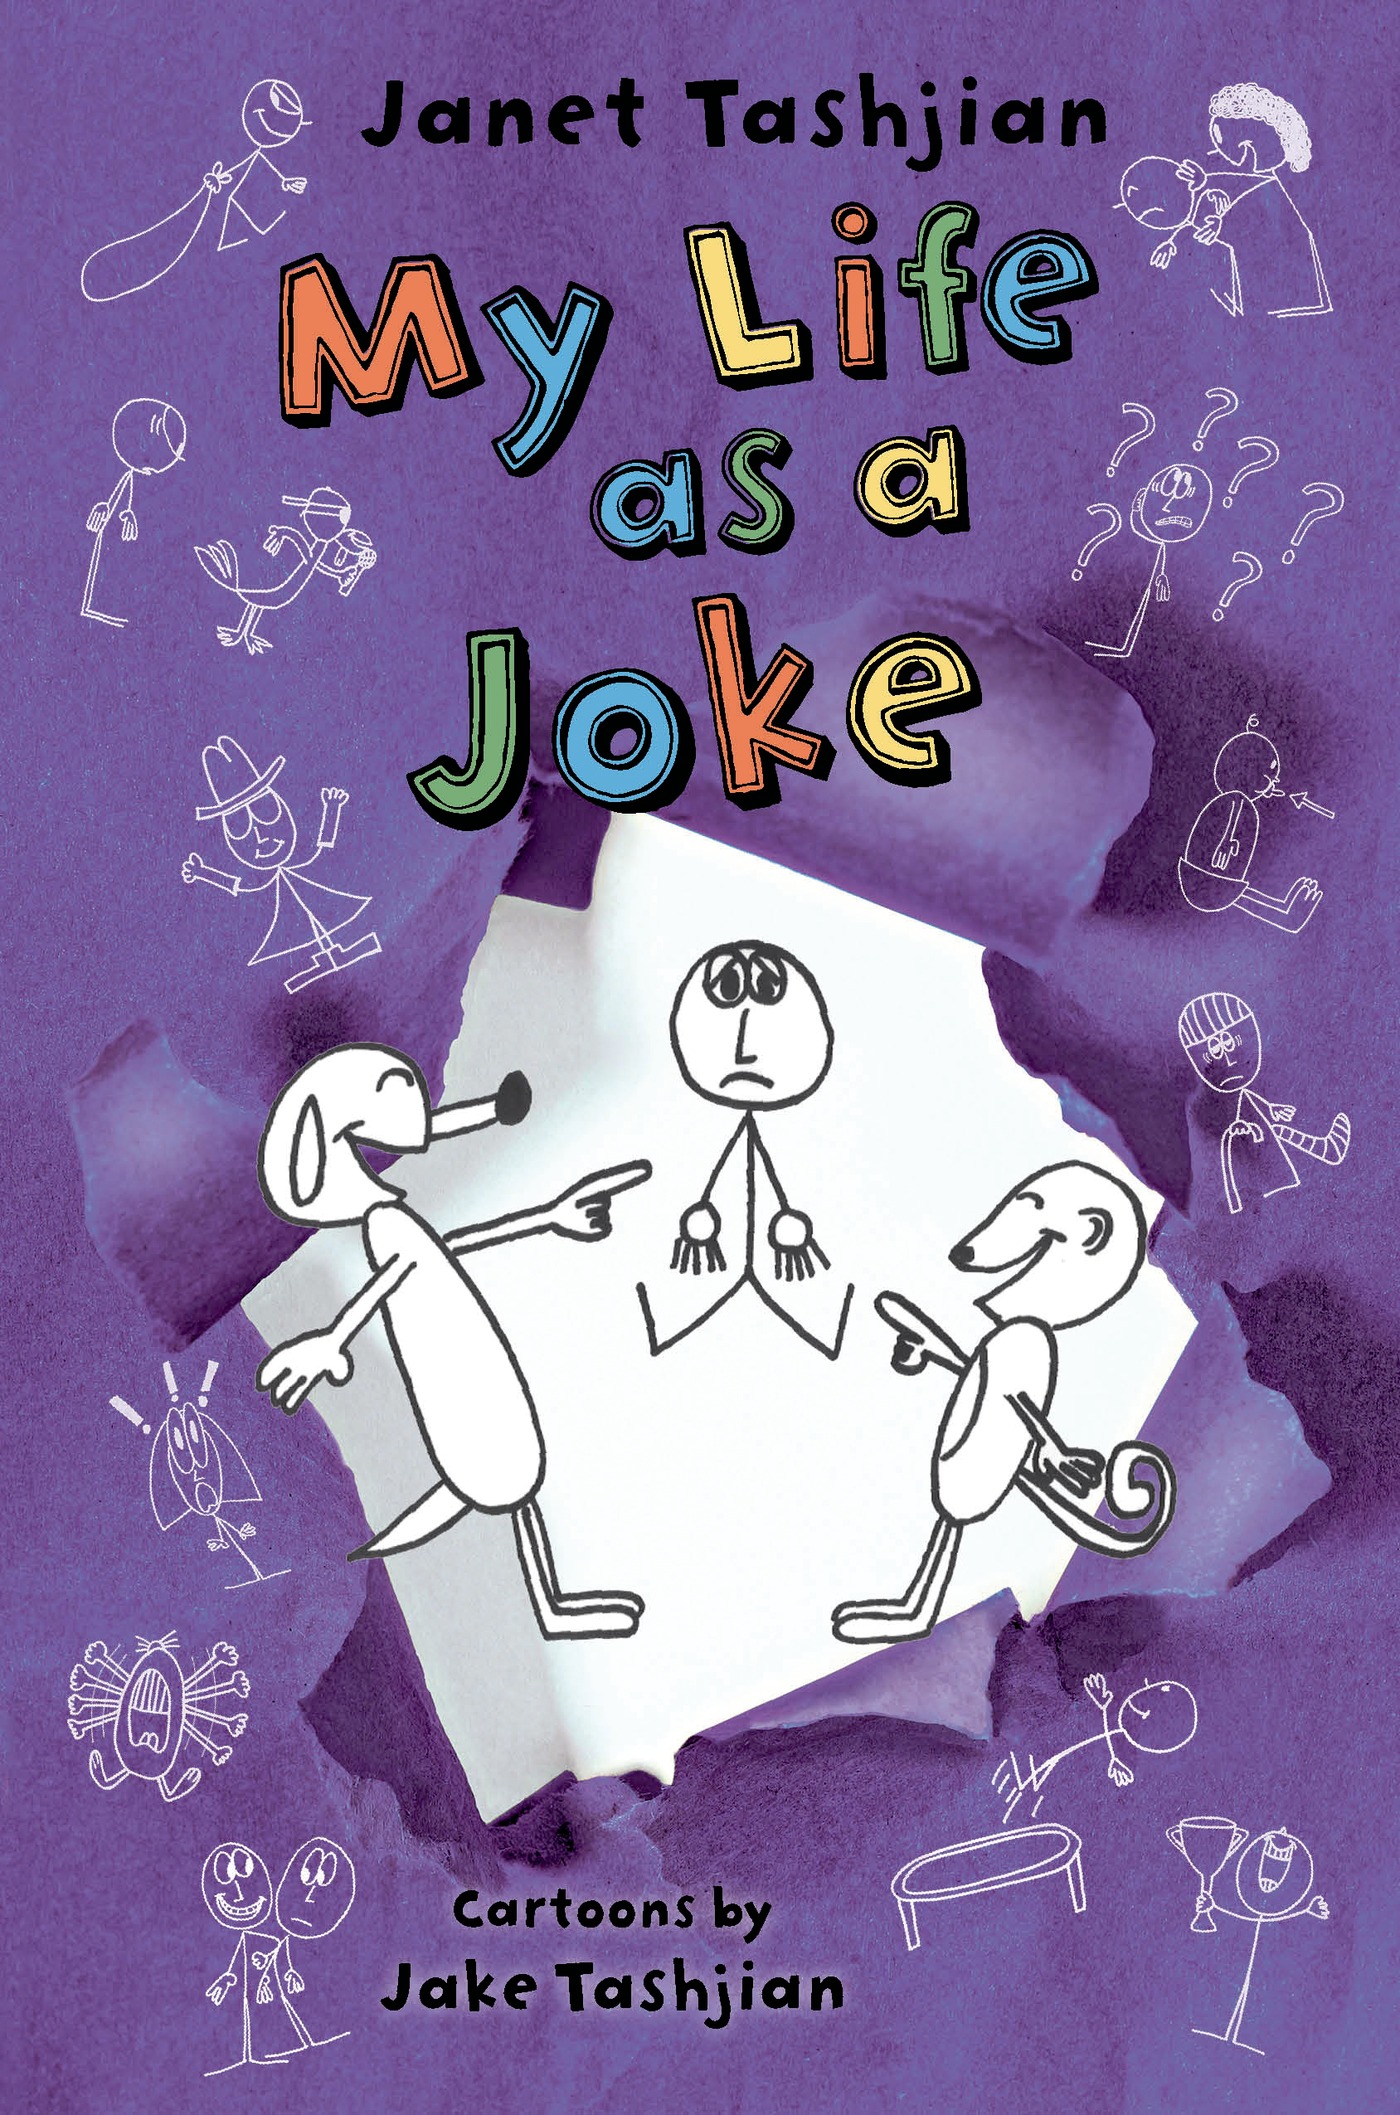 Book cover of My life as a joke